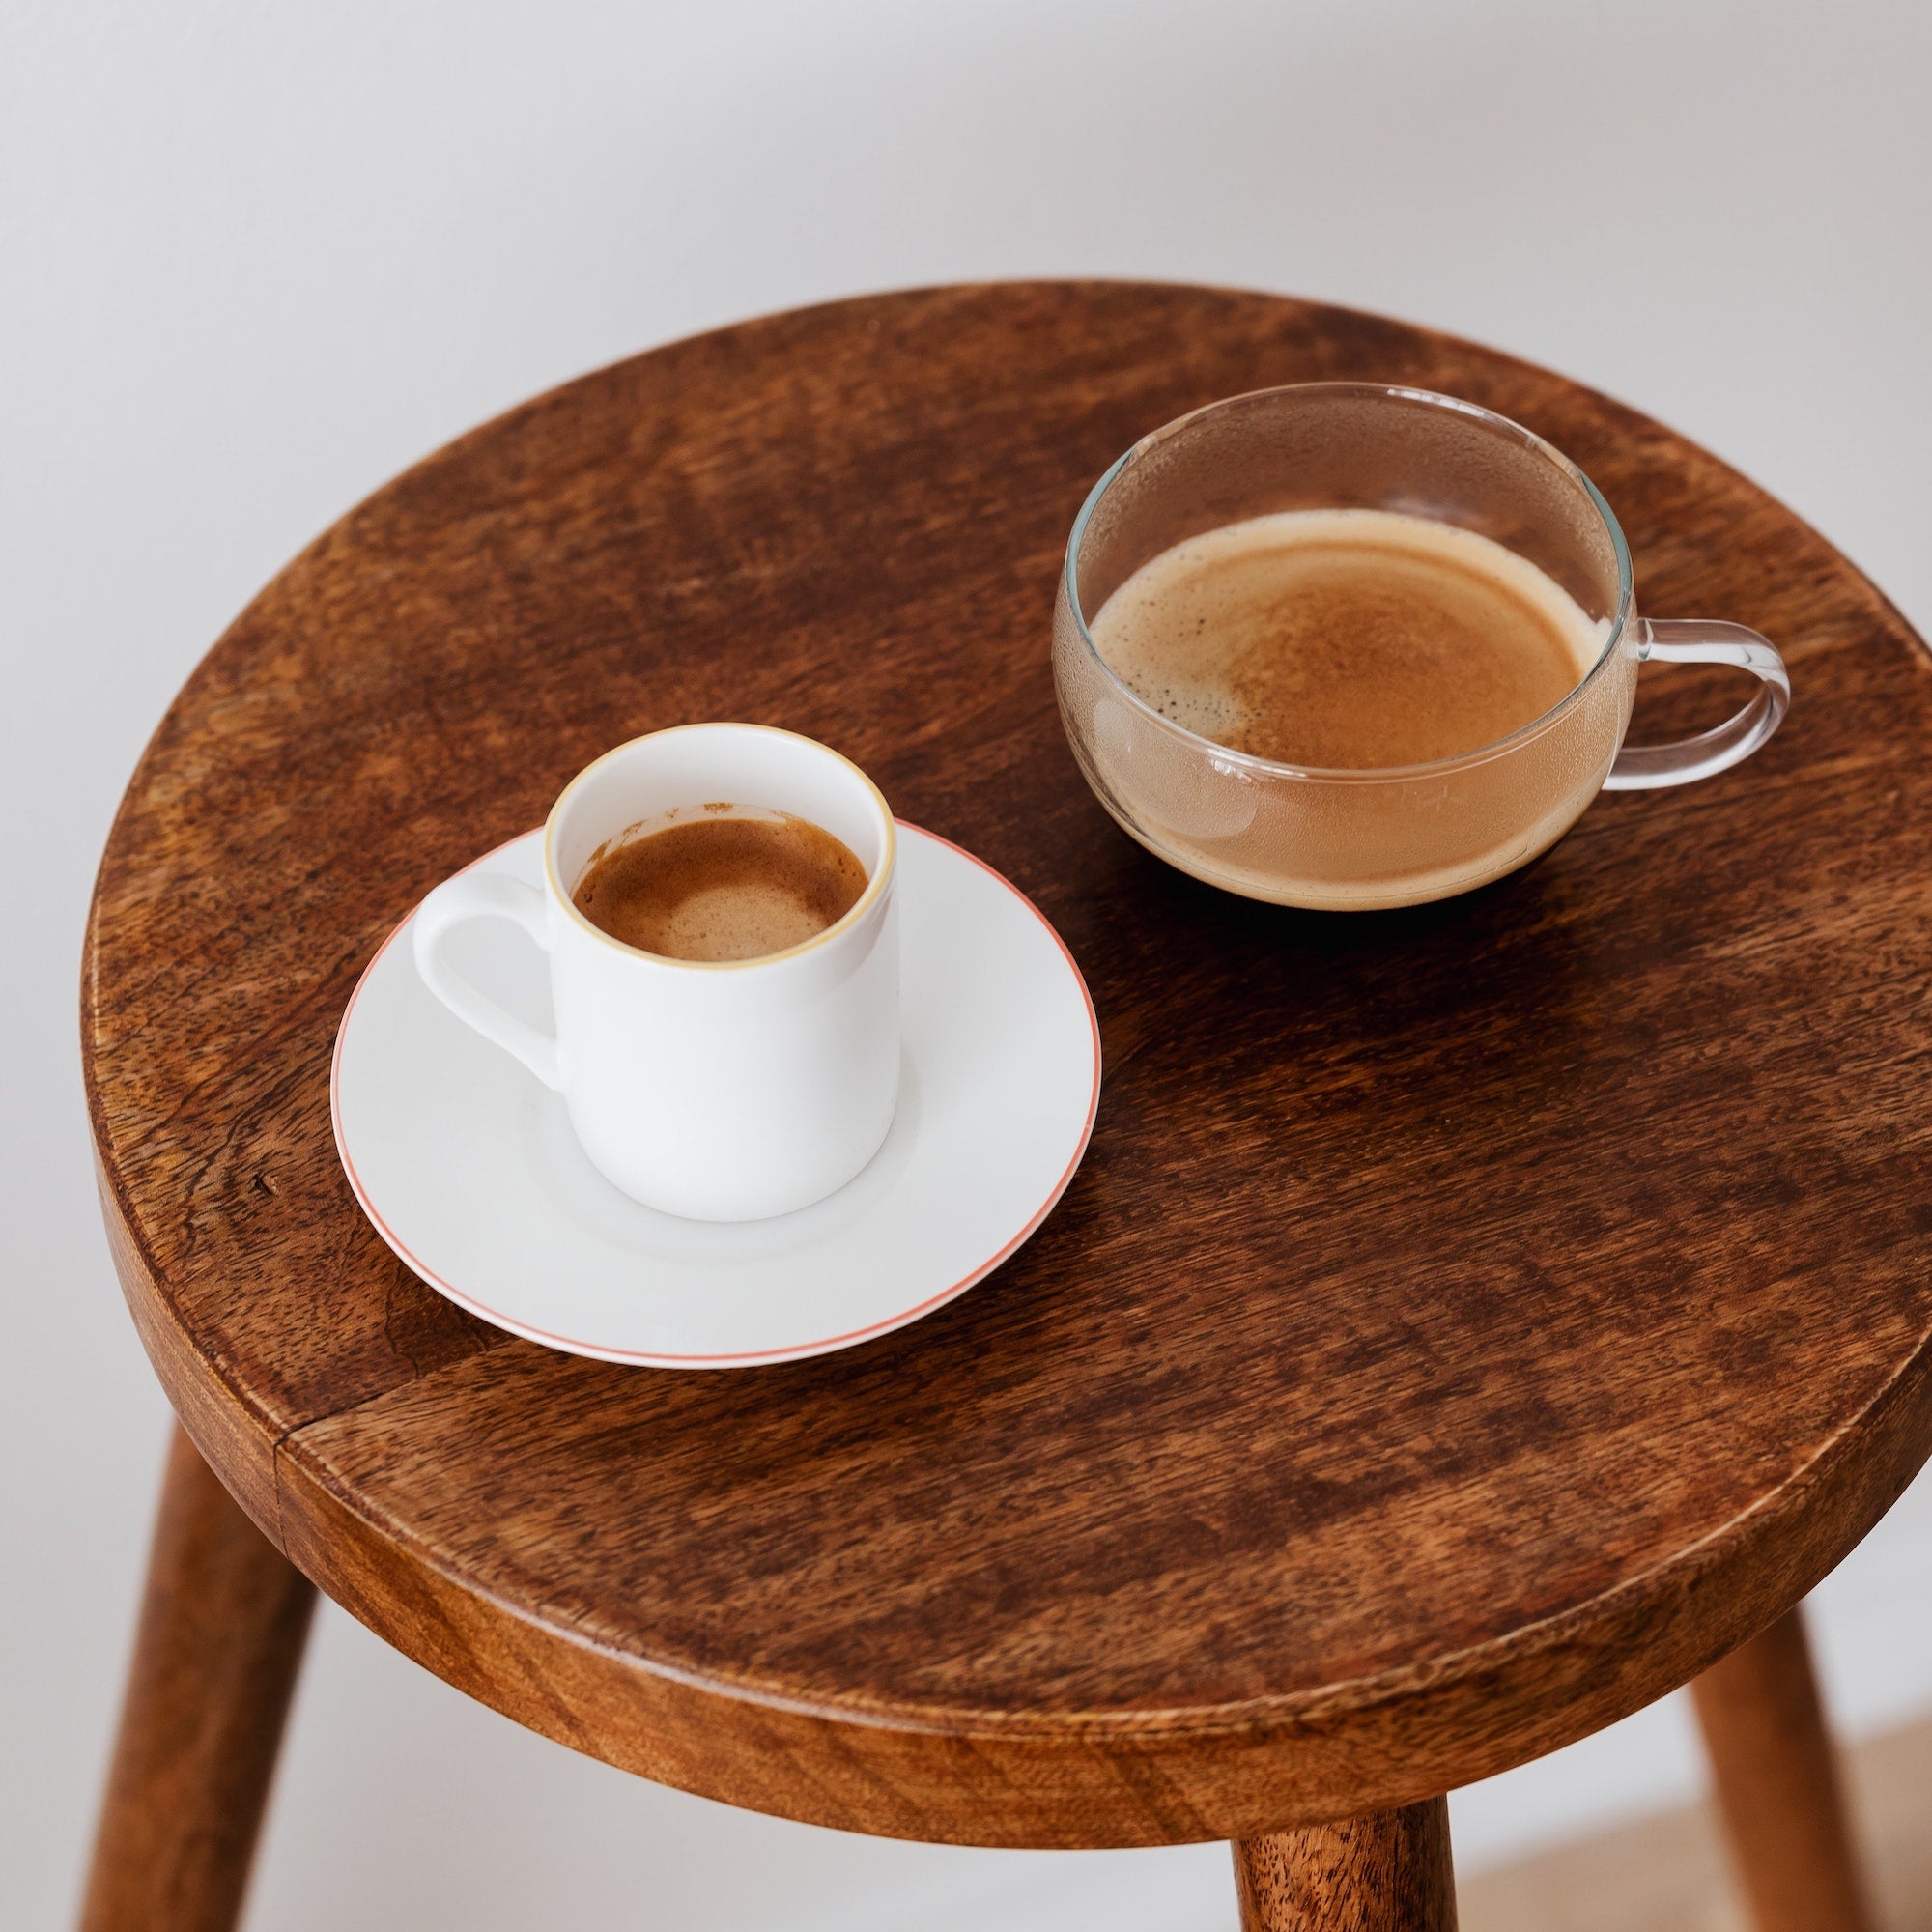 What Is the Difference Between Espresso, Lungo, and Ristretto?